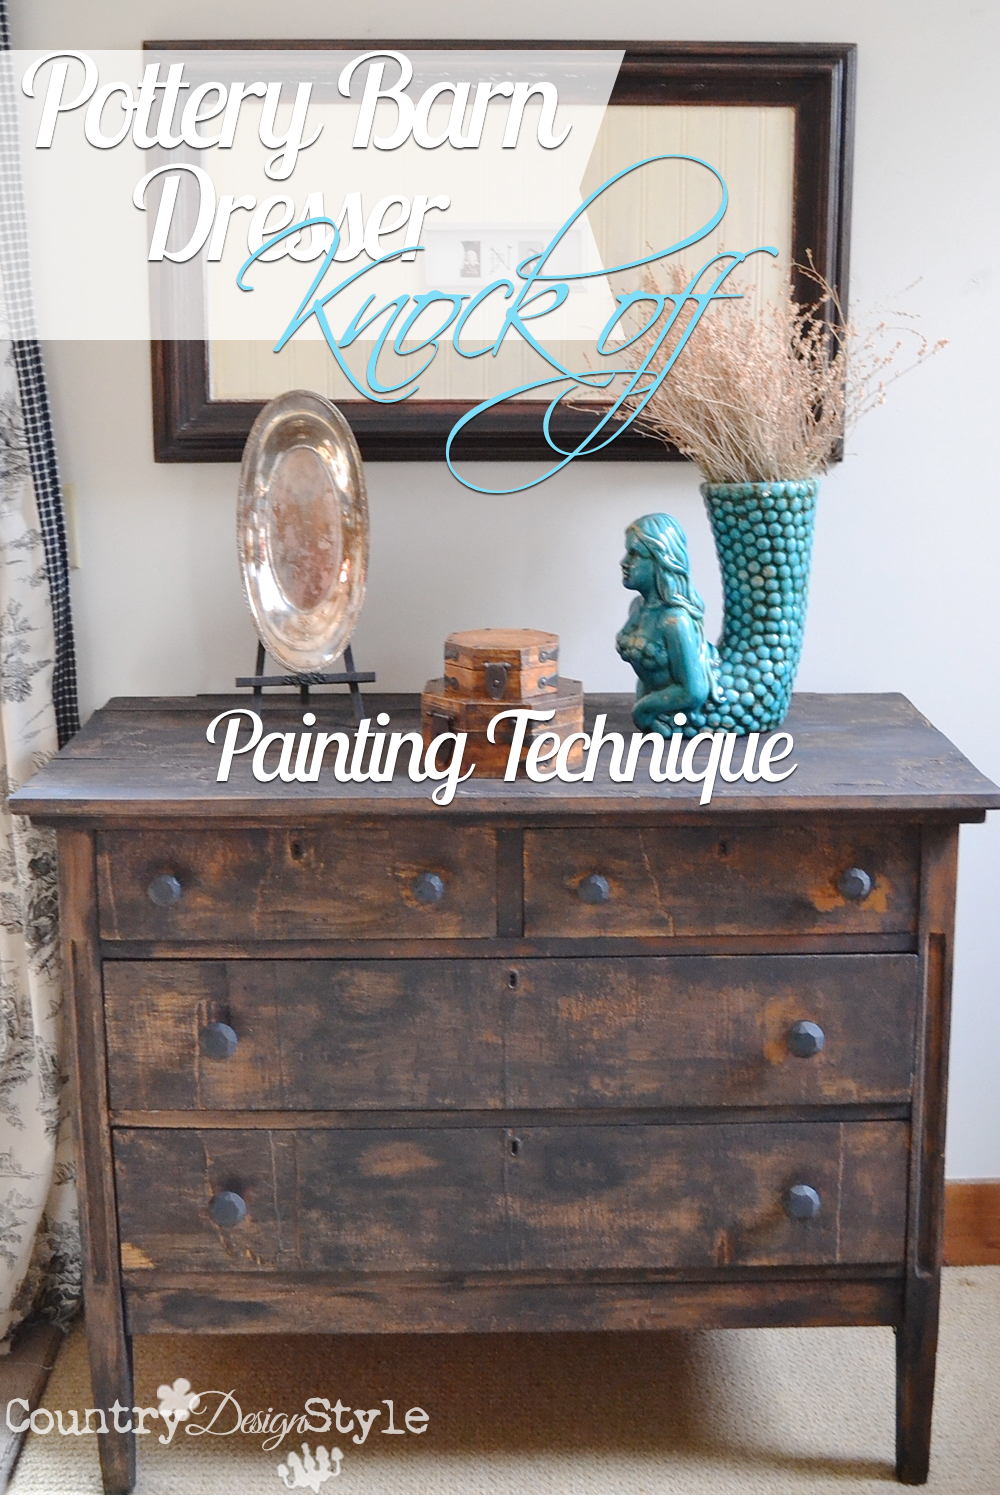 pottery-barn-inspired-painting-technique-country-design-style-pn2